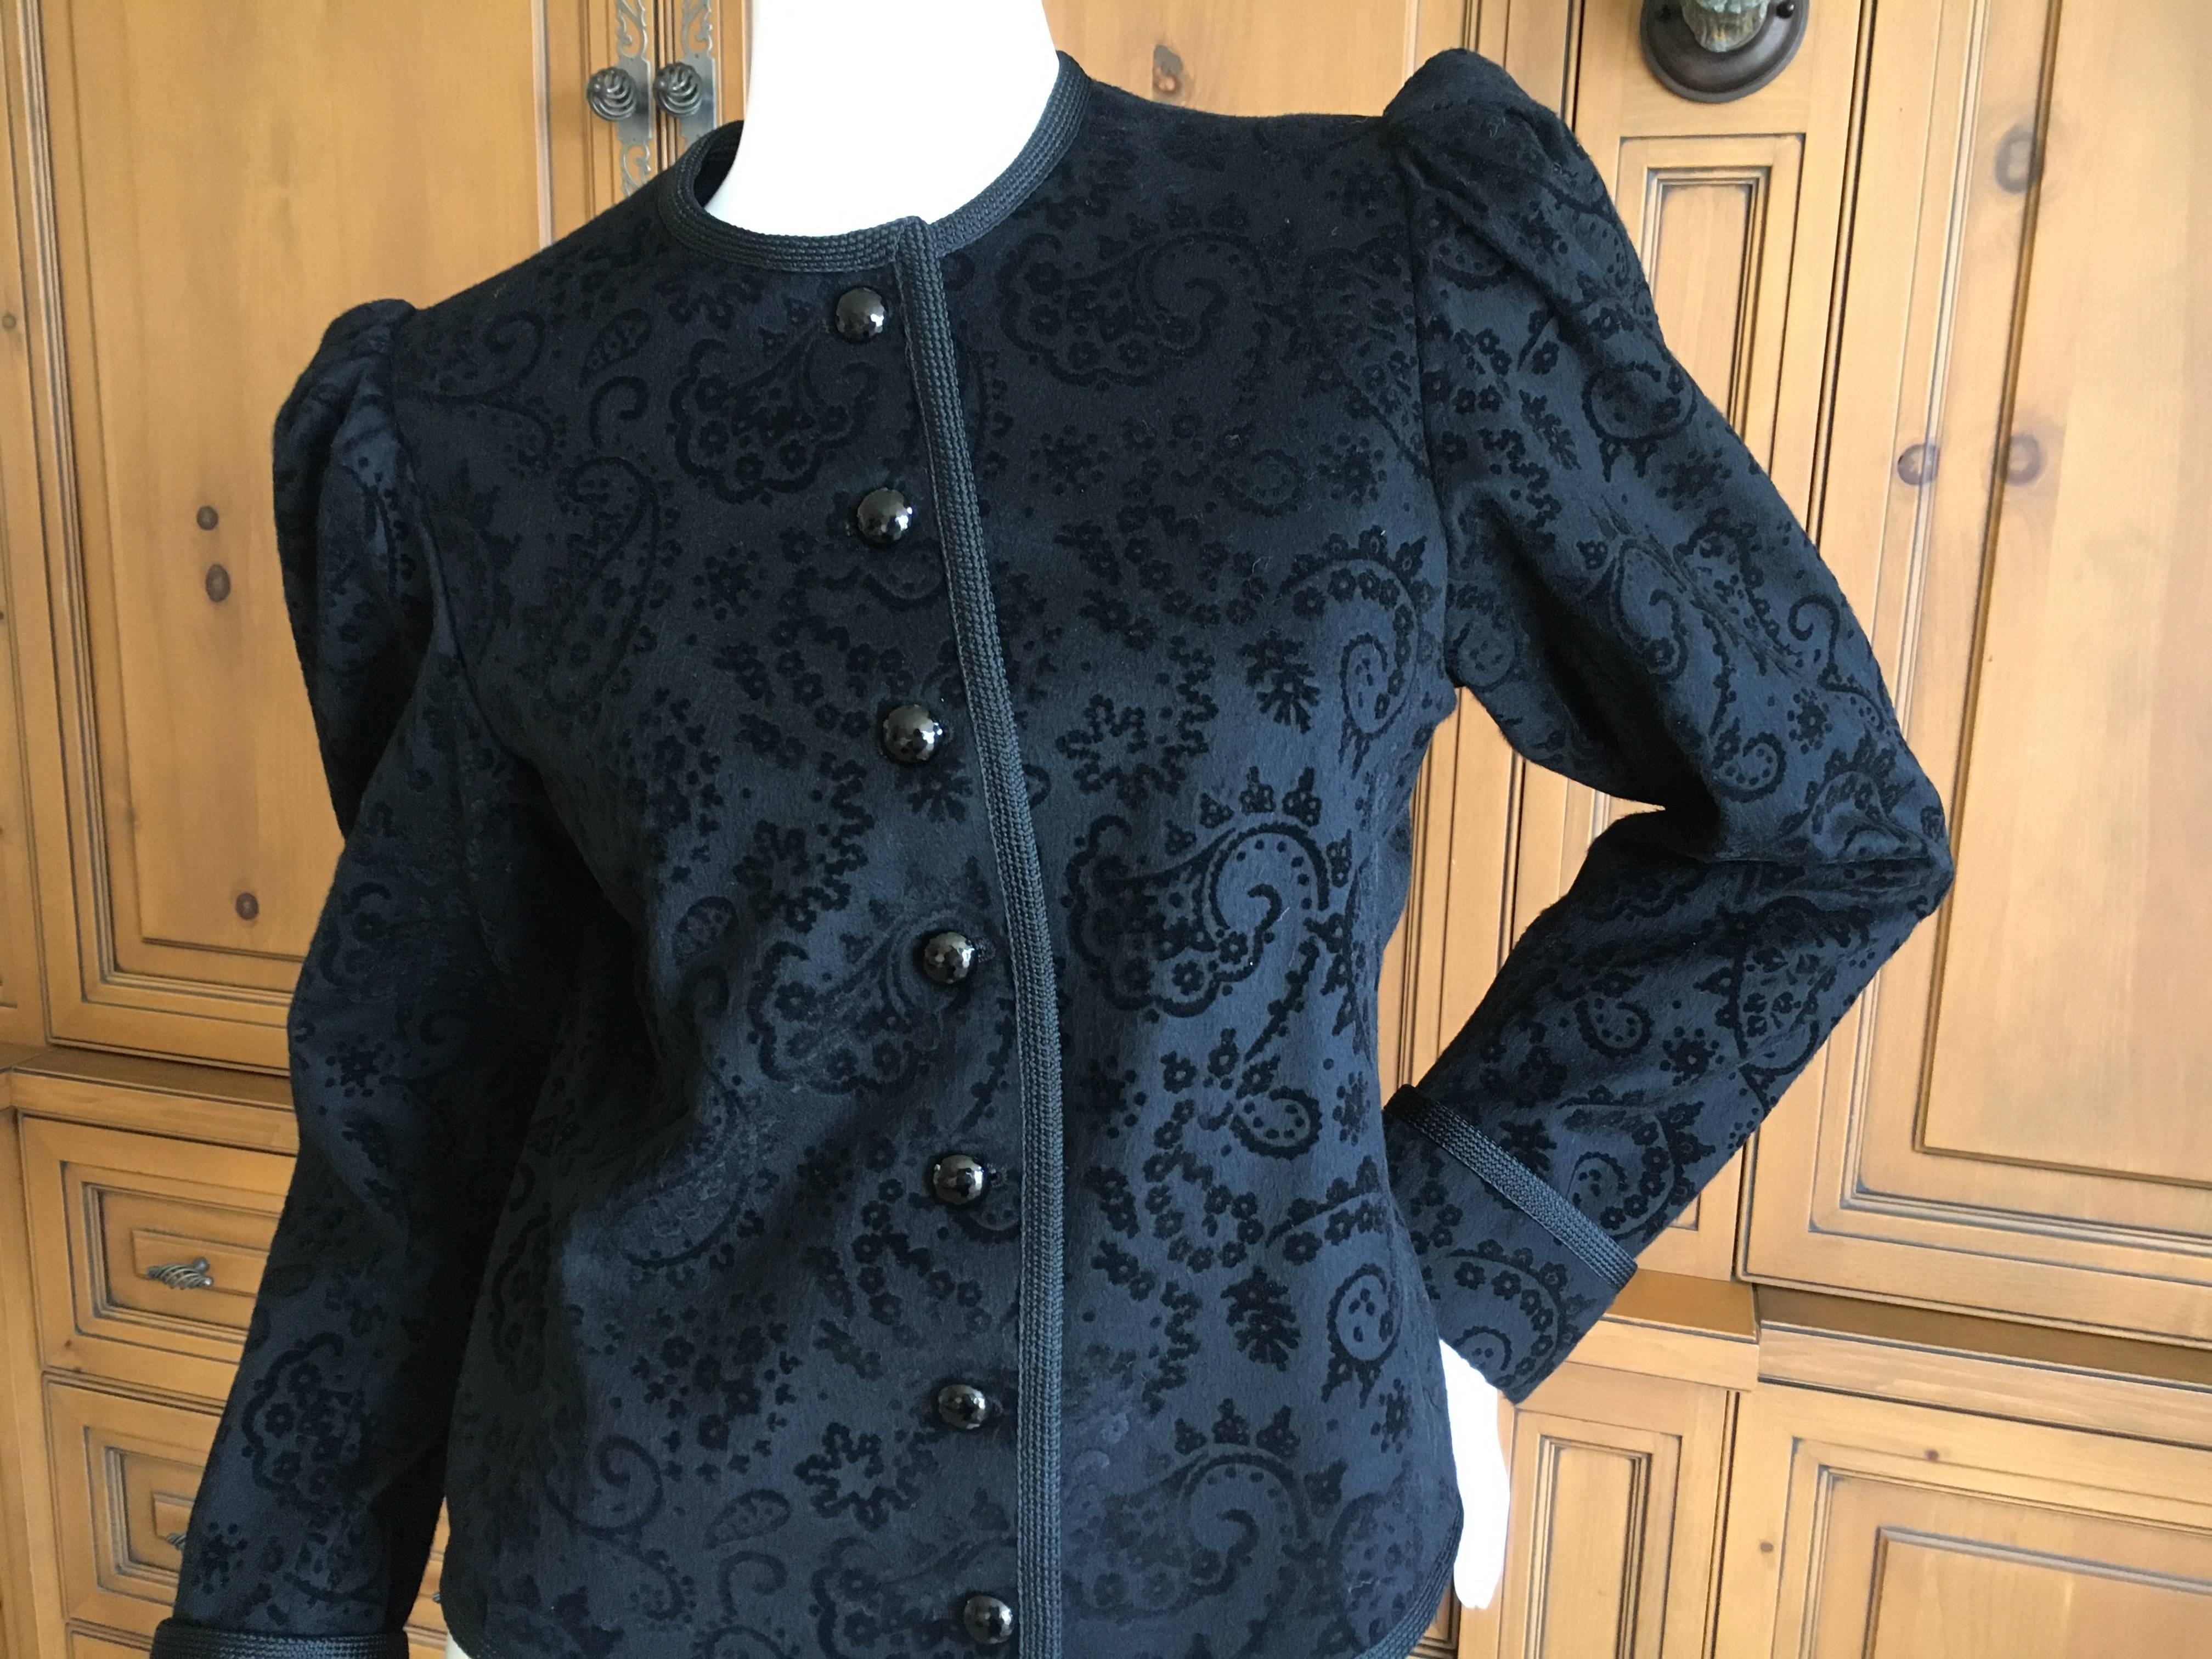 Saint Laurent Rive Gauche 1980 Black Jacket with Jet Buttons and Cord Trim.
The fabric feels like cashmere or very fine woo, with a velvet pattern, very pretty, but hard to capture in a photograph.
Size 40
Bust 38